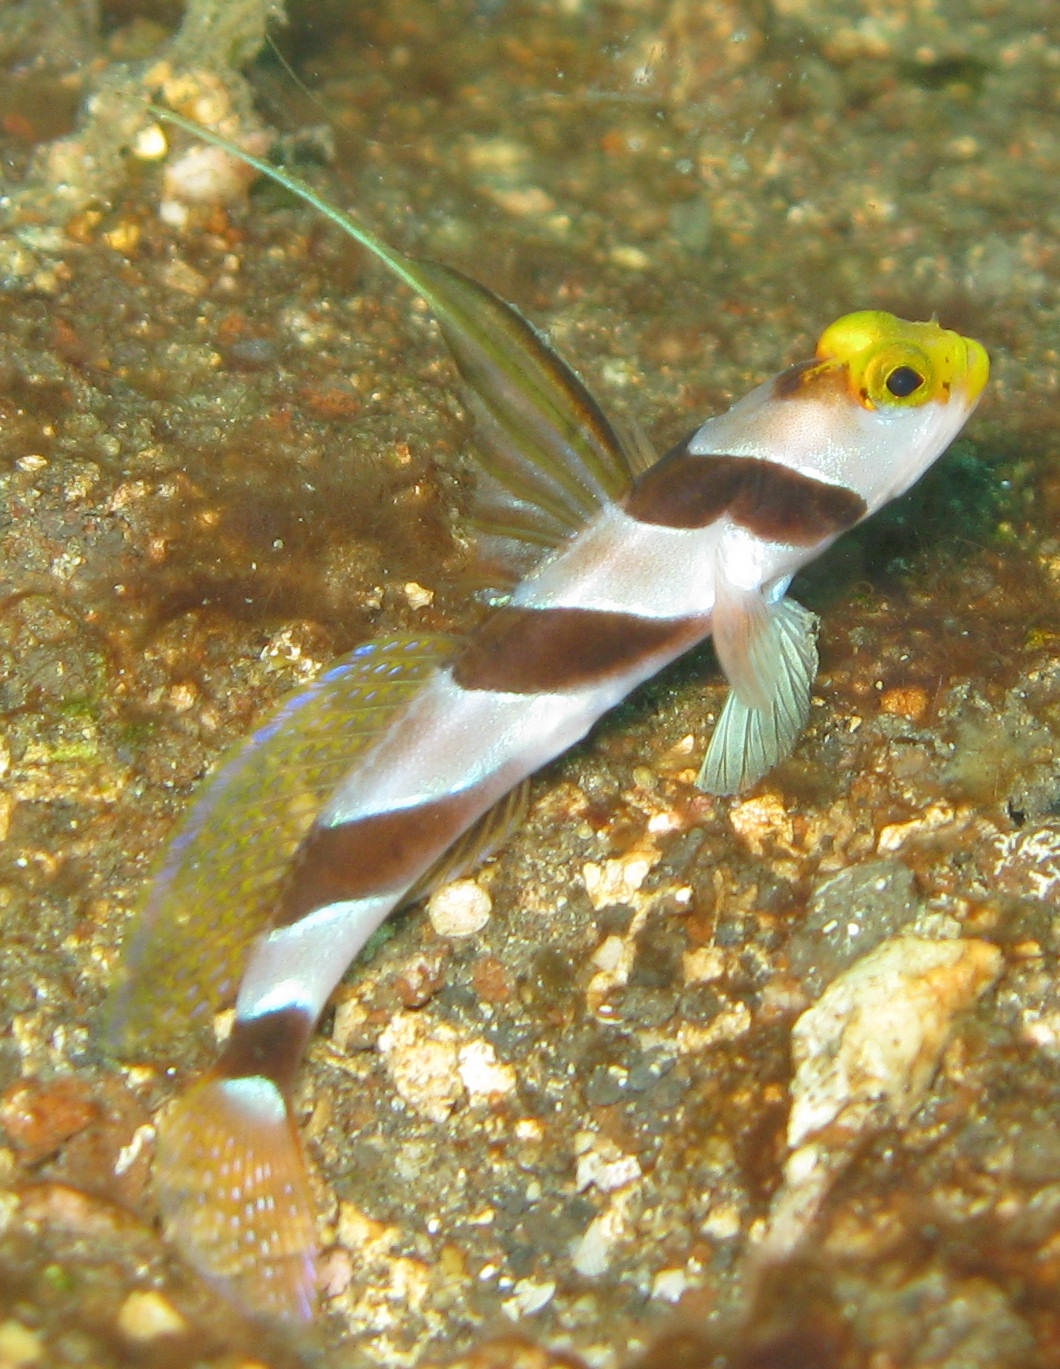 there is a fish in the water with a black, brown and white stripe on its side